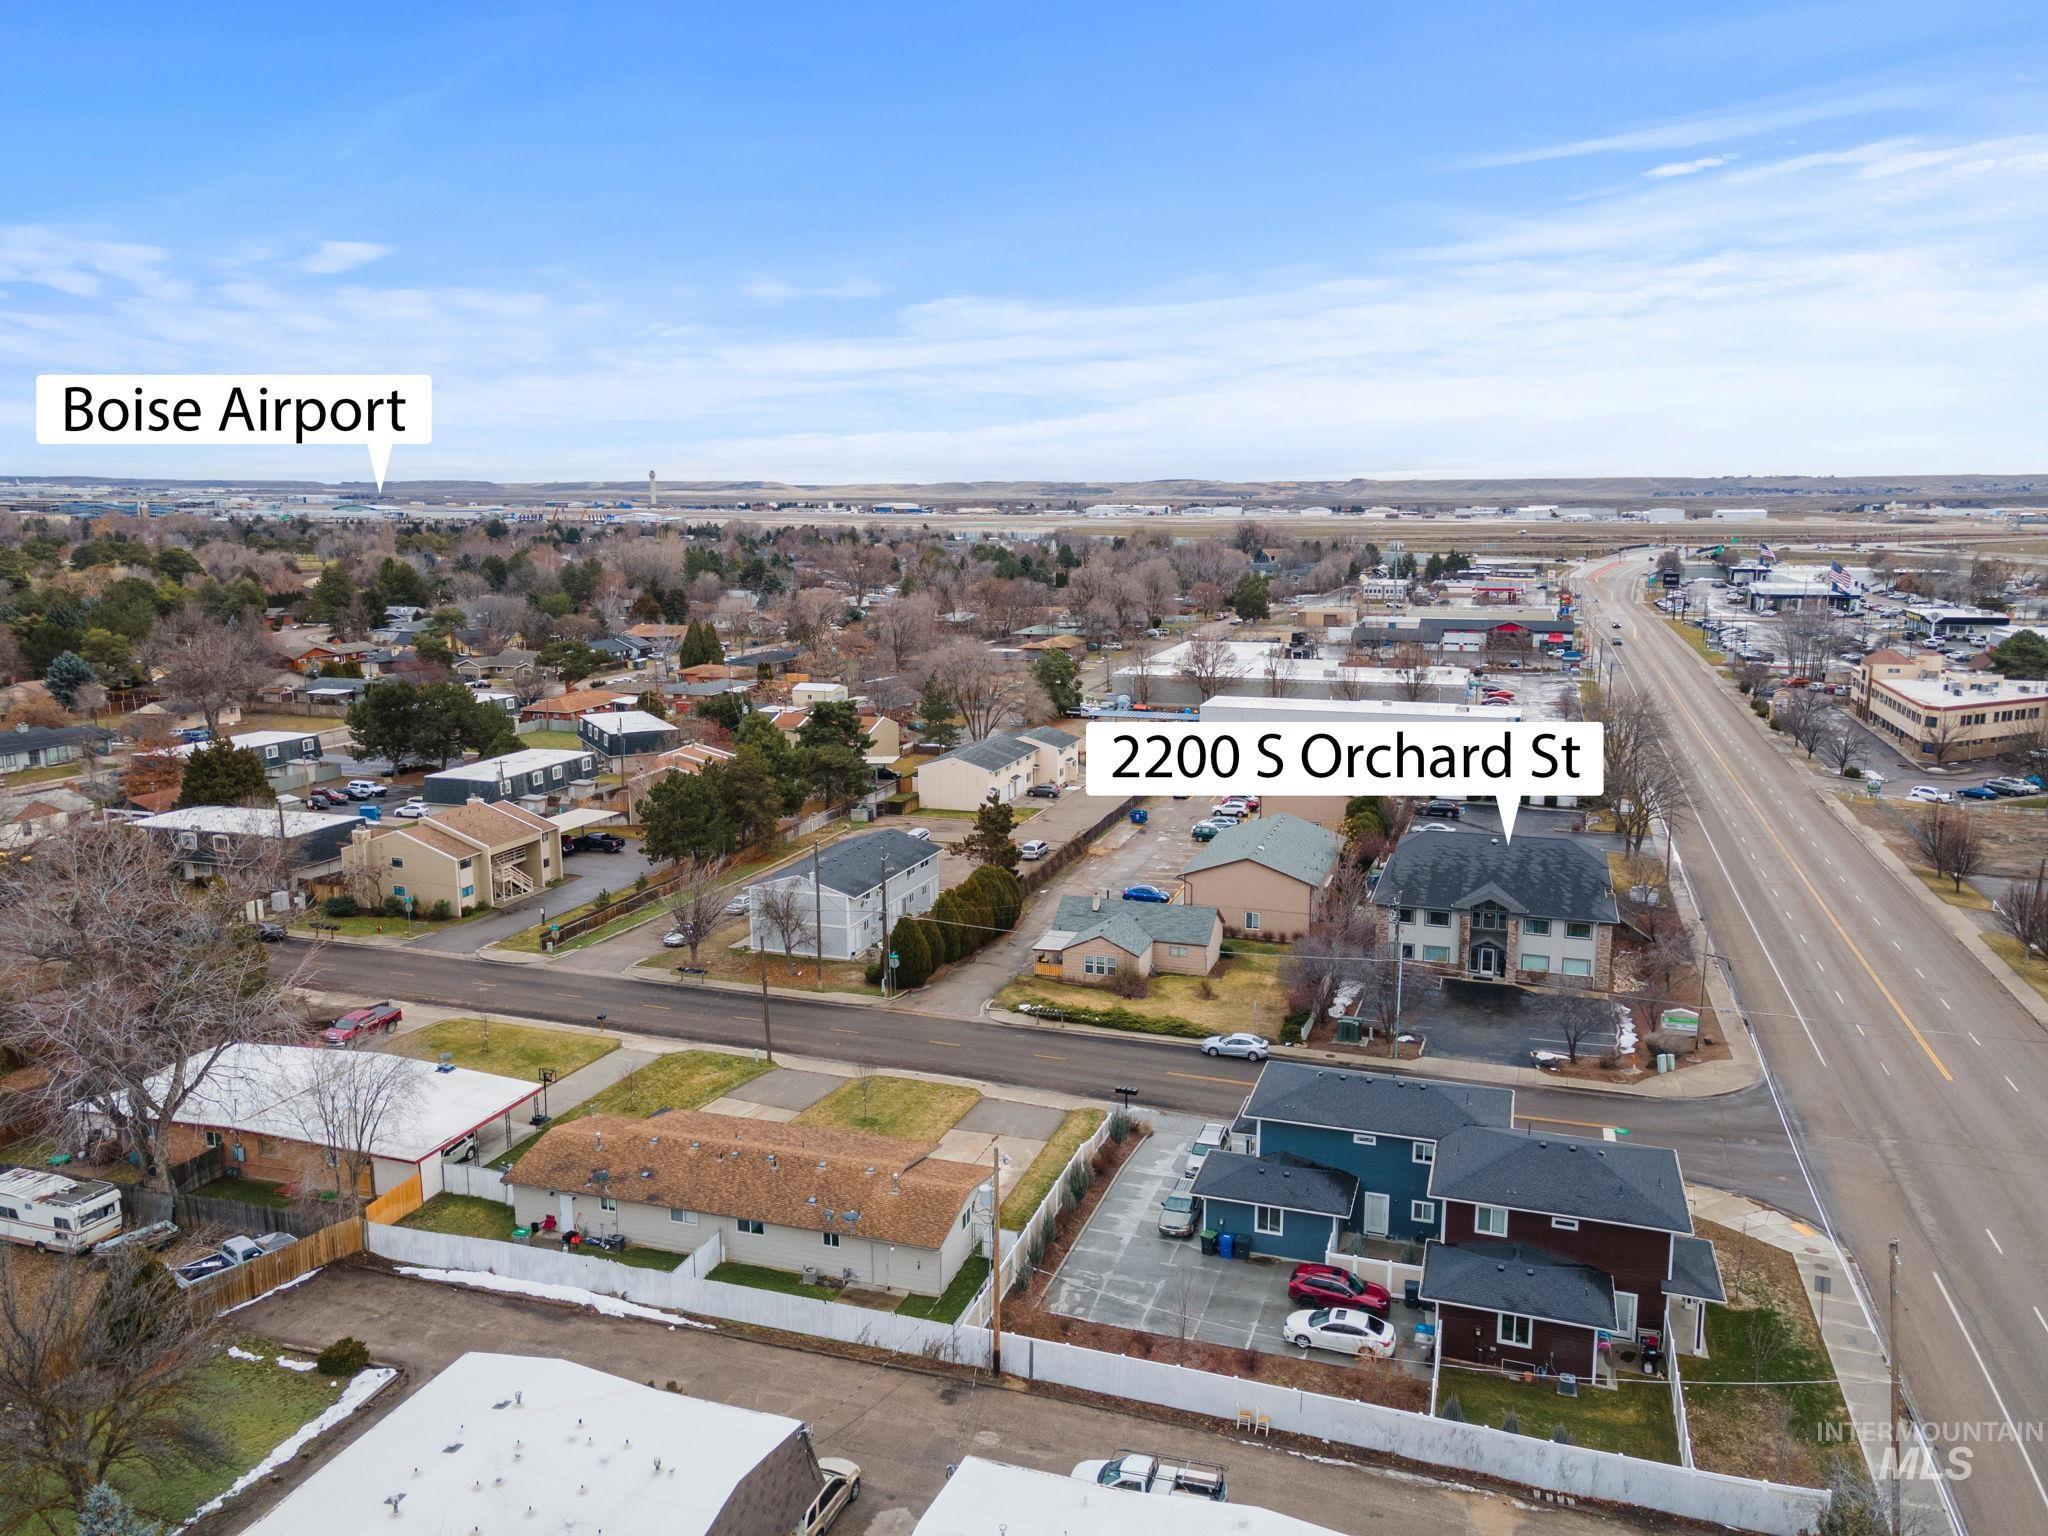 2200 S Orchard St, Boise, Idaho 83705, Business/Commercial For Sale, Price $1,300,000,MLS 98899250